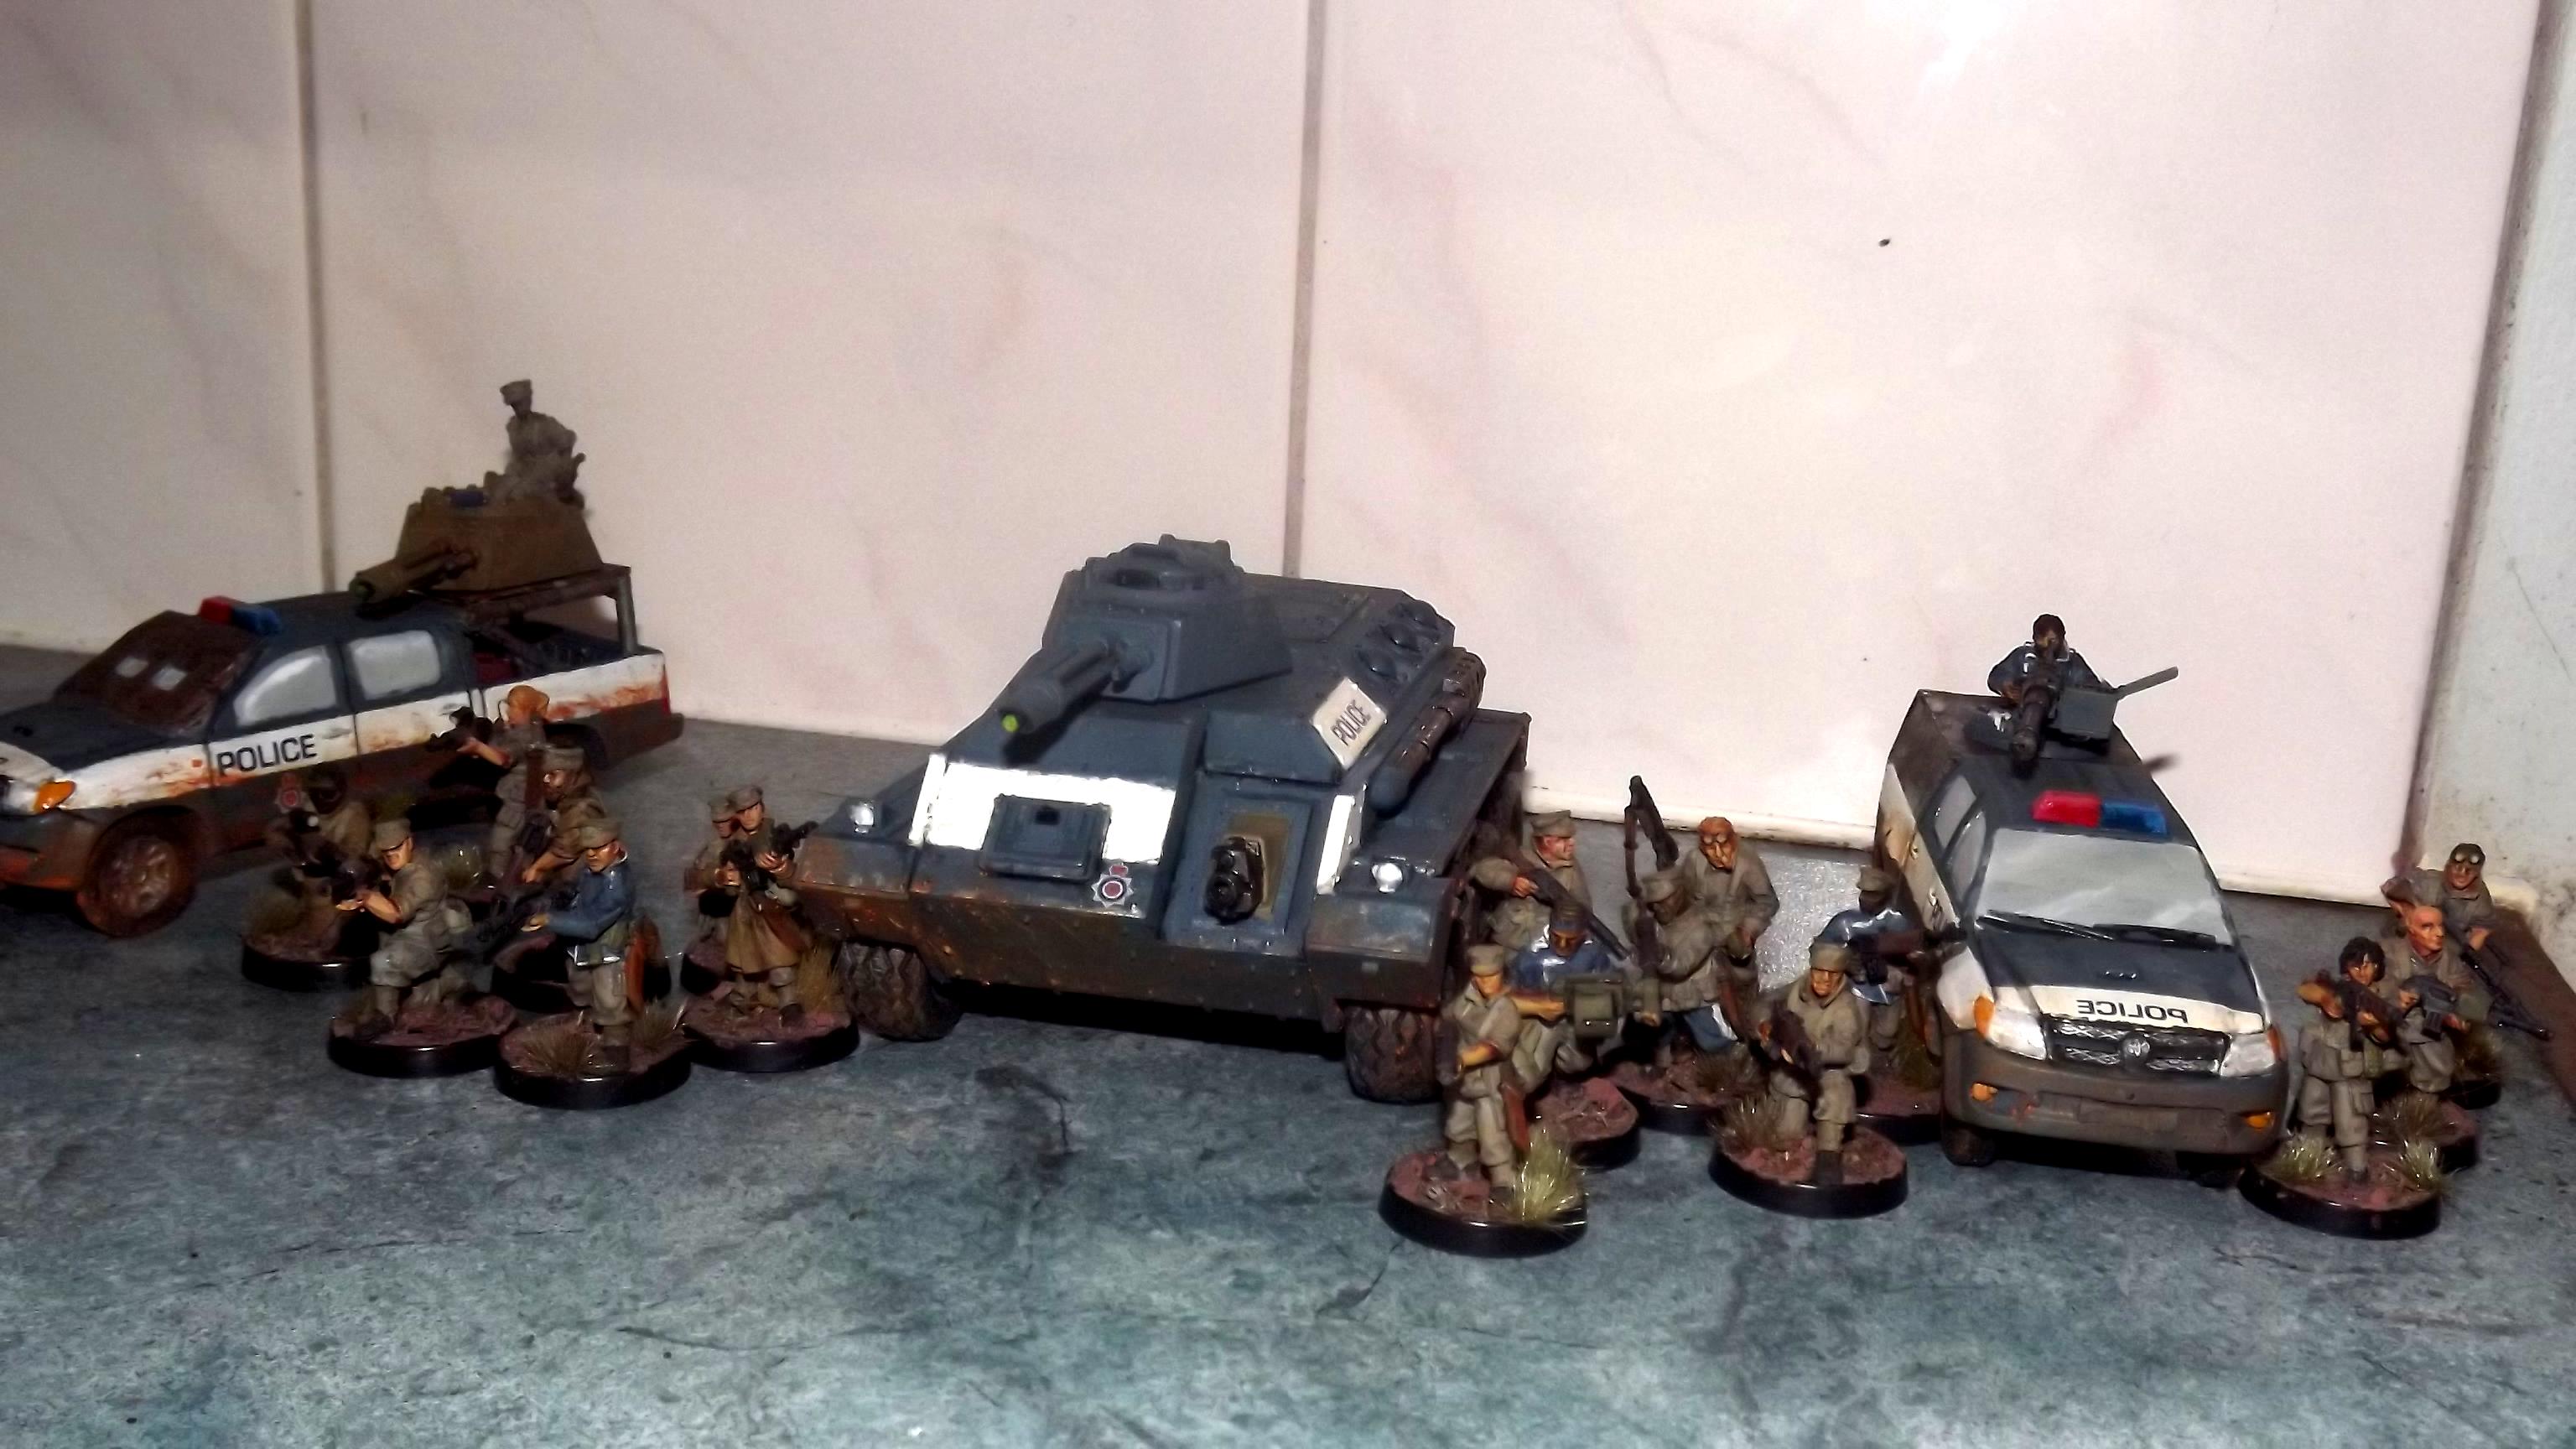 Chimera, Conversion, Coversion, Hilux, Law Enforcement, Milita, Militia, Models And Minis, Police, Technical, Victoria Miniatures, Wheeled